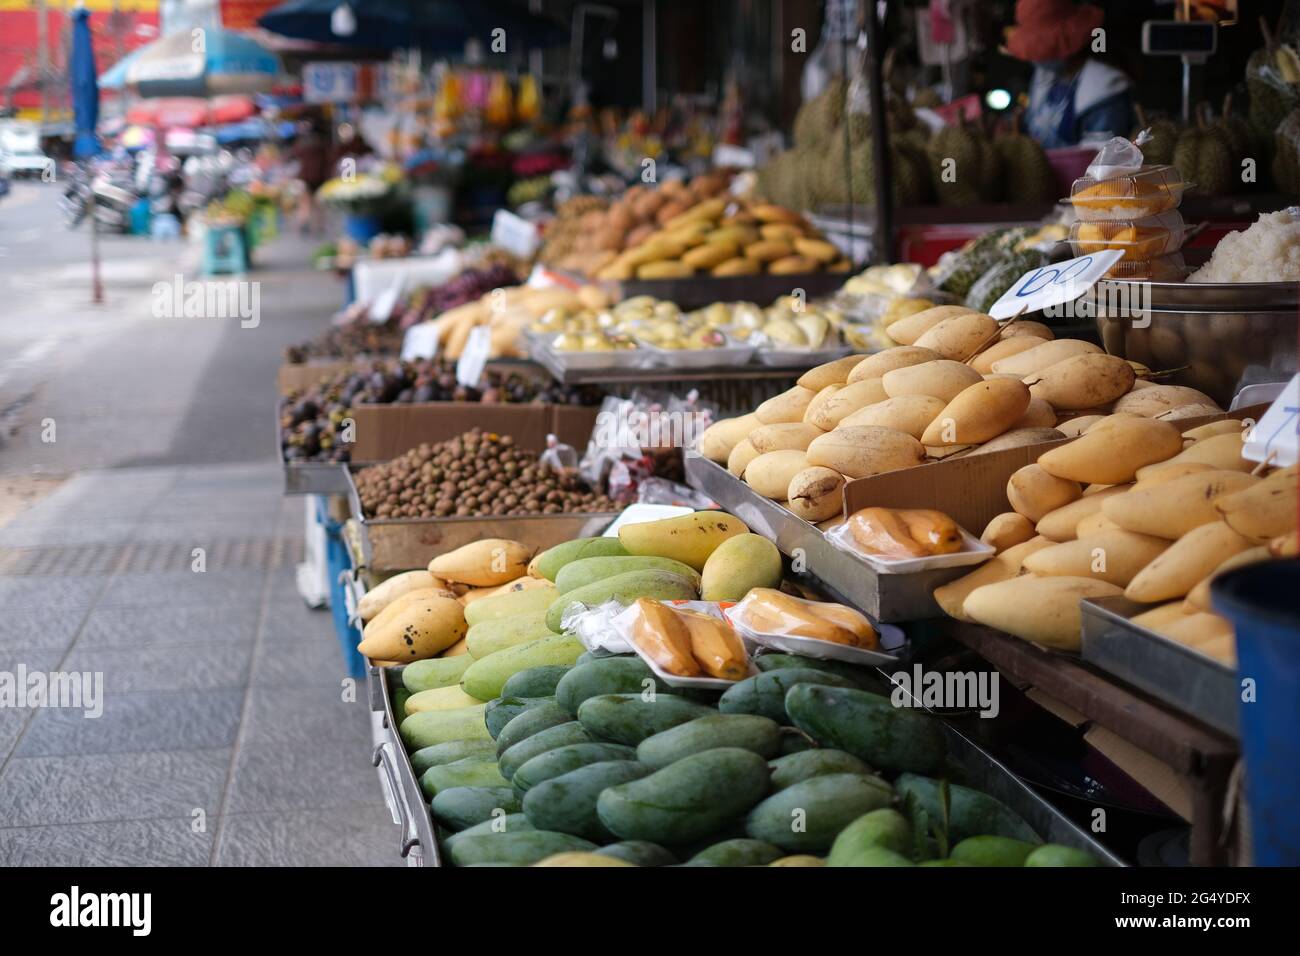 Stalls at a typical street market in Thailand, full of fresh fruits and vegetables Stock Photo